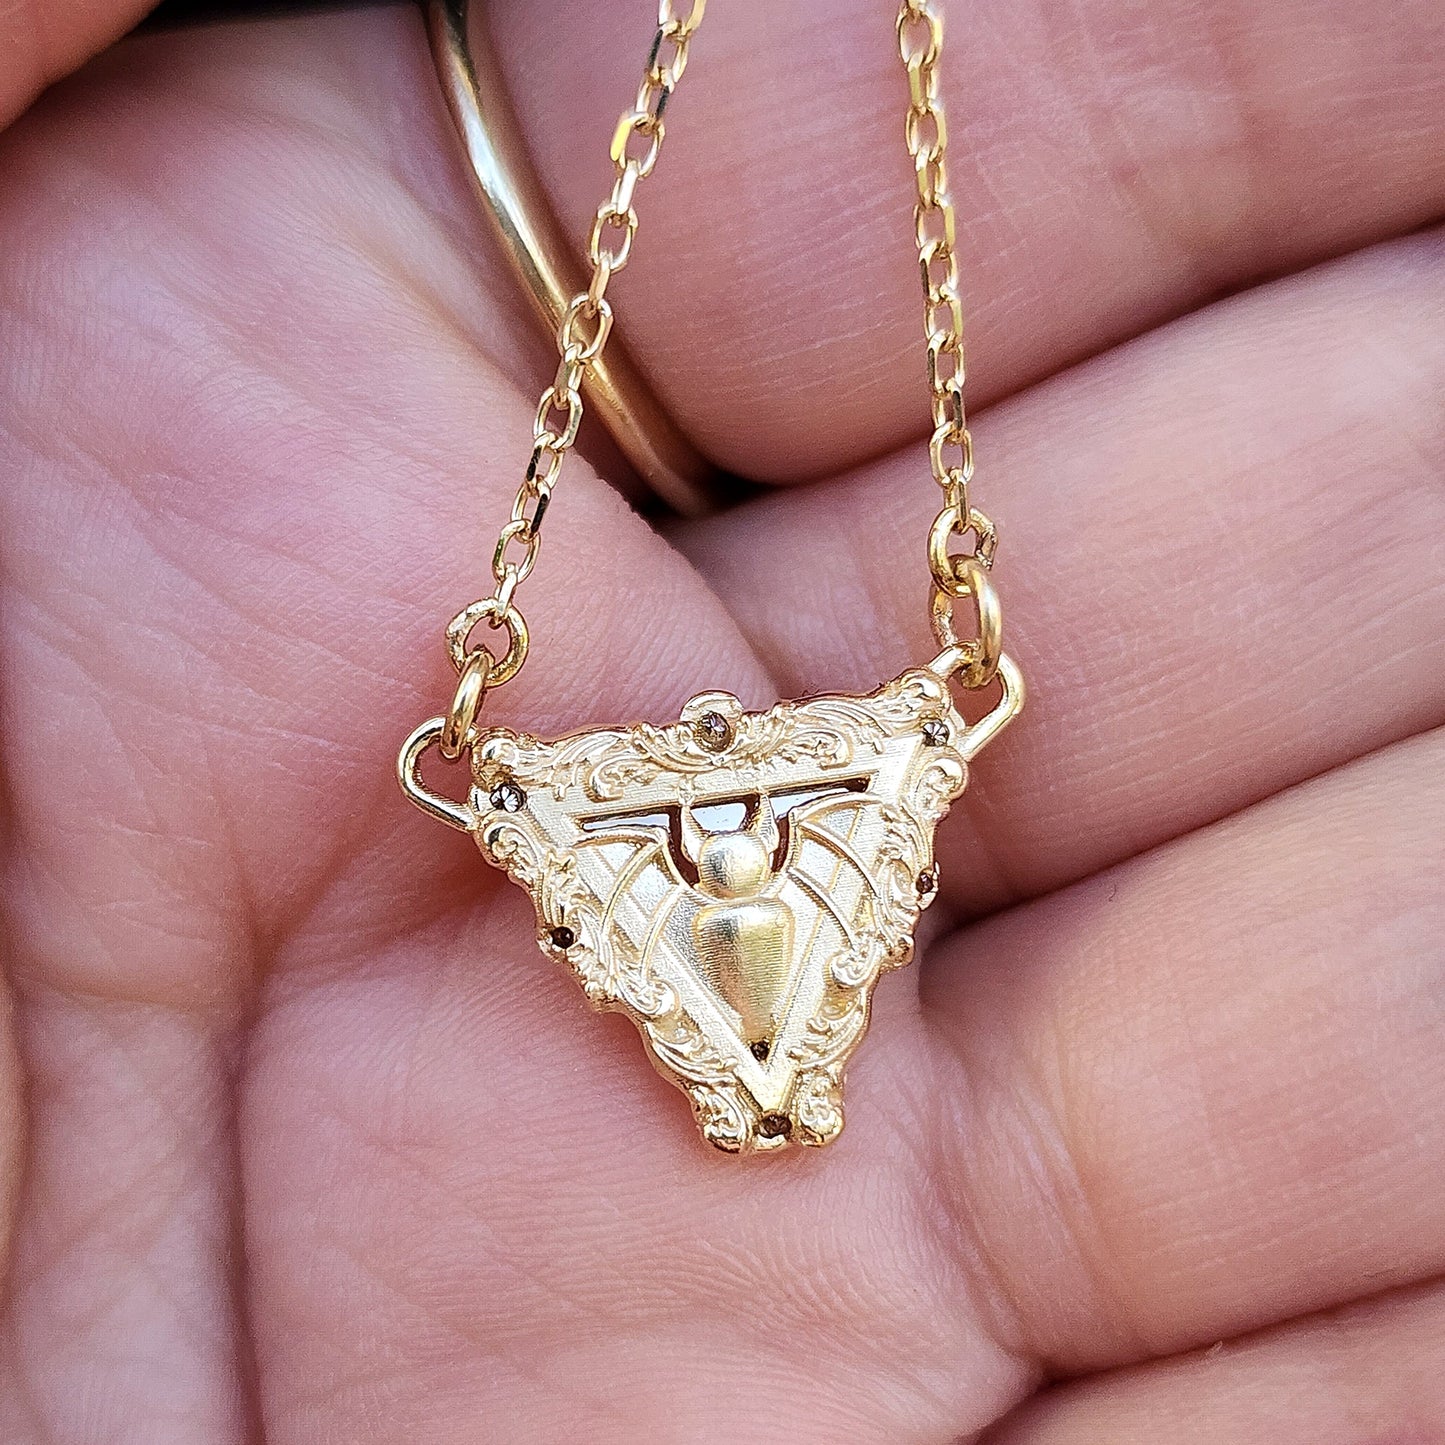 Vampire Bat Pendant with Triangle Moissanite Window Pane and Baroque Gold Frame on Star Chain 14k Yellow Gold - Ready to Ship